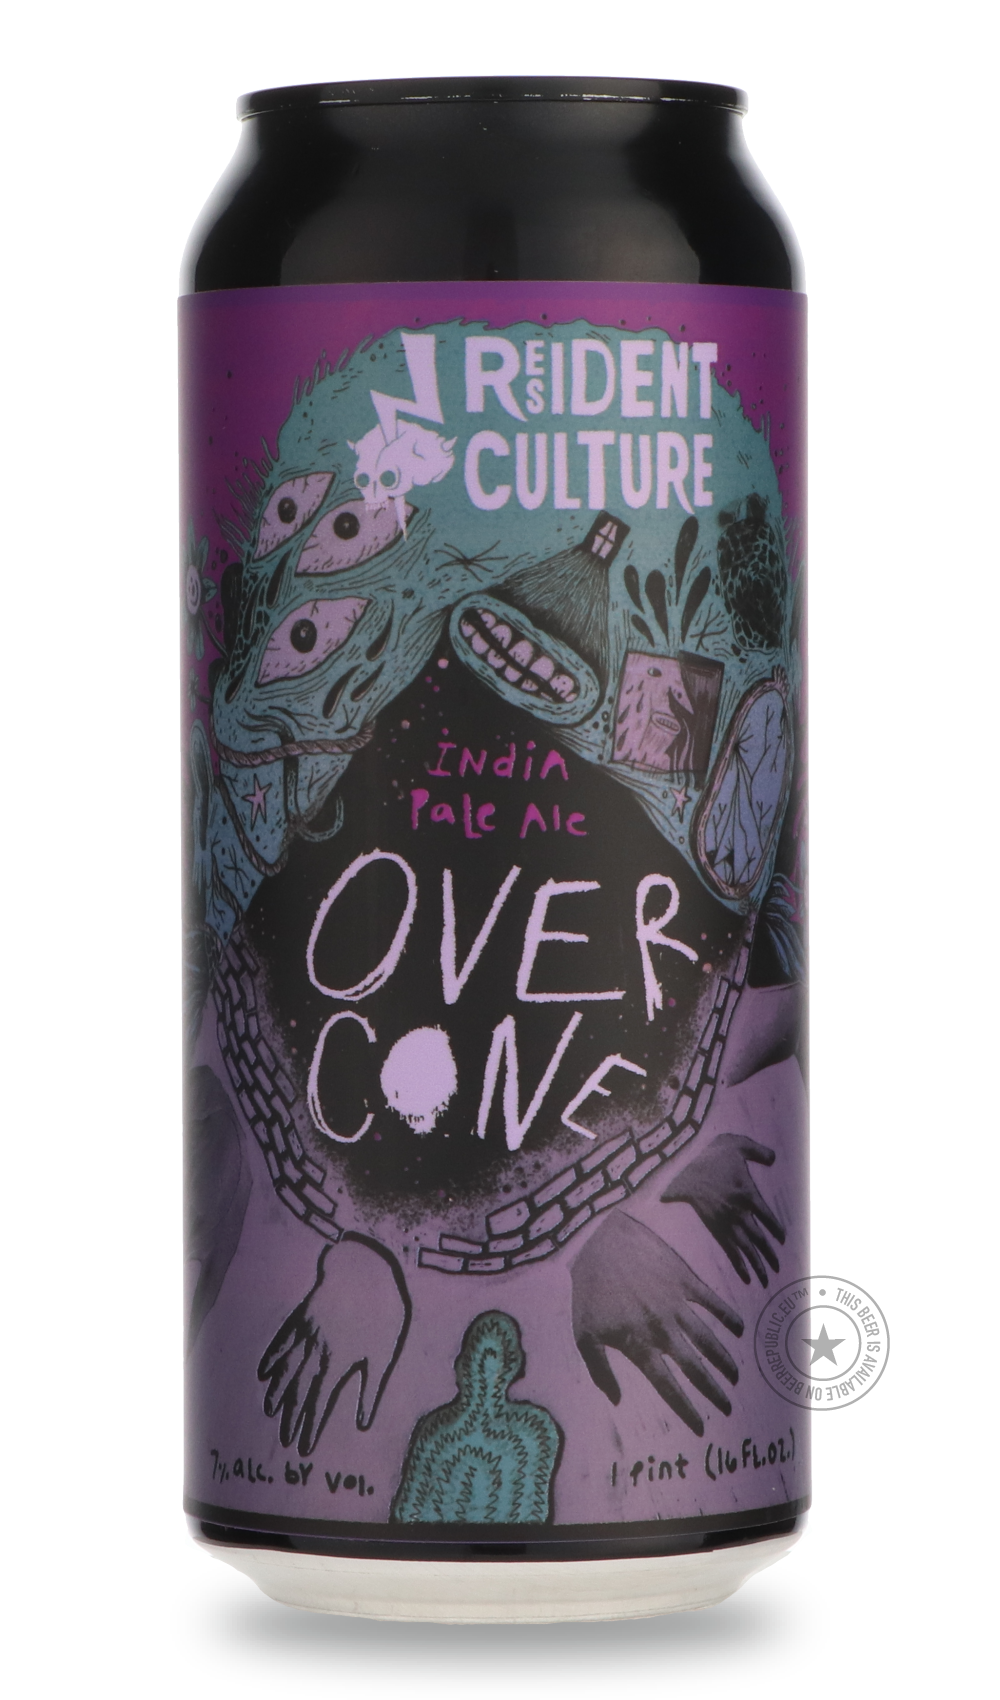 -Resident Culture- Over Cone-IPA- Only @ Beer Republic - The best online beer store for American & Canadian craft beer - Buy beer online from the USA and Canada - Bier online kopen - Amerikaans bier kopen - Craft beer store - Craft beer kopen - Amerikanisch bier kaufen - Bier online kaufen - Acheter biere online - IPA - Stout - Porter - New England IPA - Hazy IPA - Imperial Stout - Barrel Aged - Barrel Aged Imperial Stout - Brown - Dark beer - Blond - Blonde - Pilsner - Lager - Wheat - Weizen - Amber - Barl